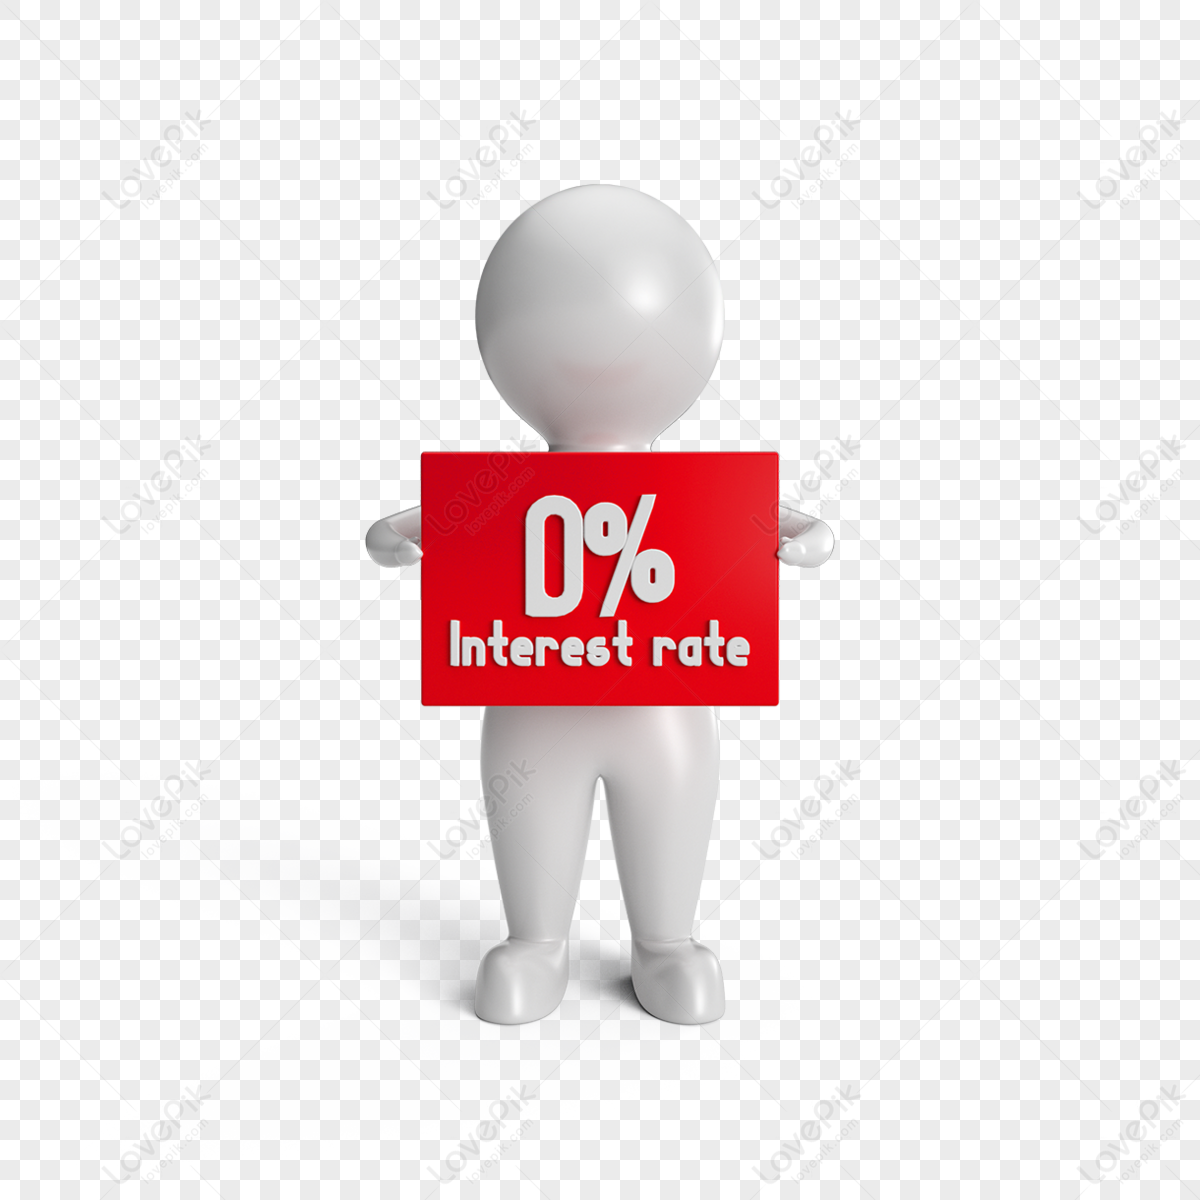 percentage sign Free Photo Download | FreeImages